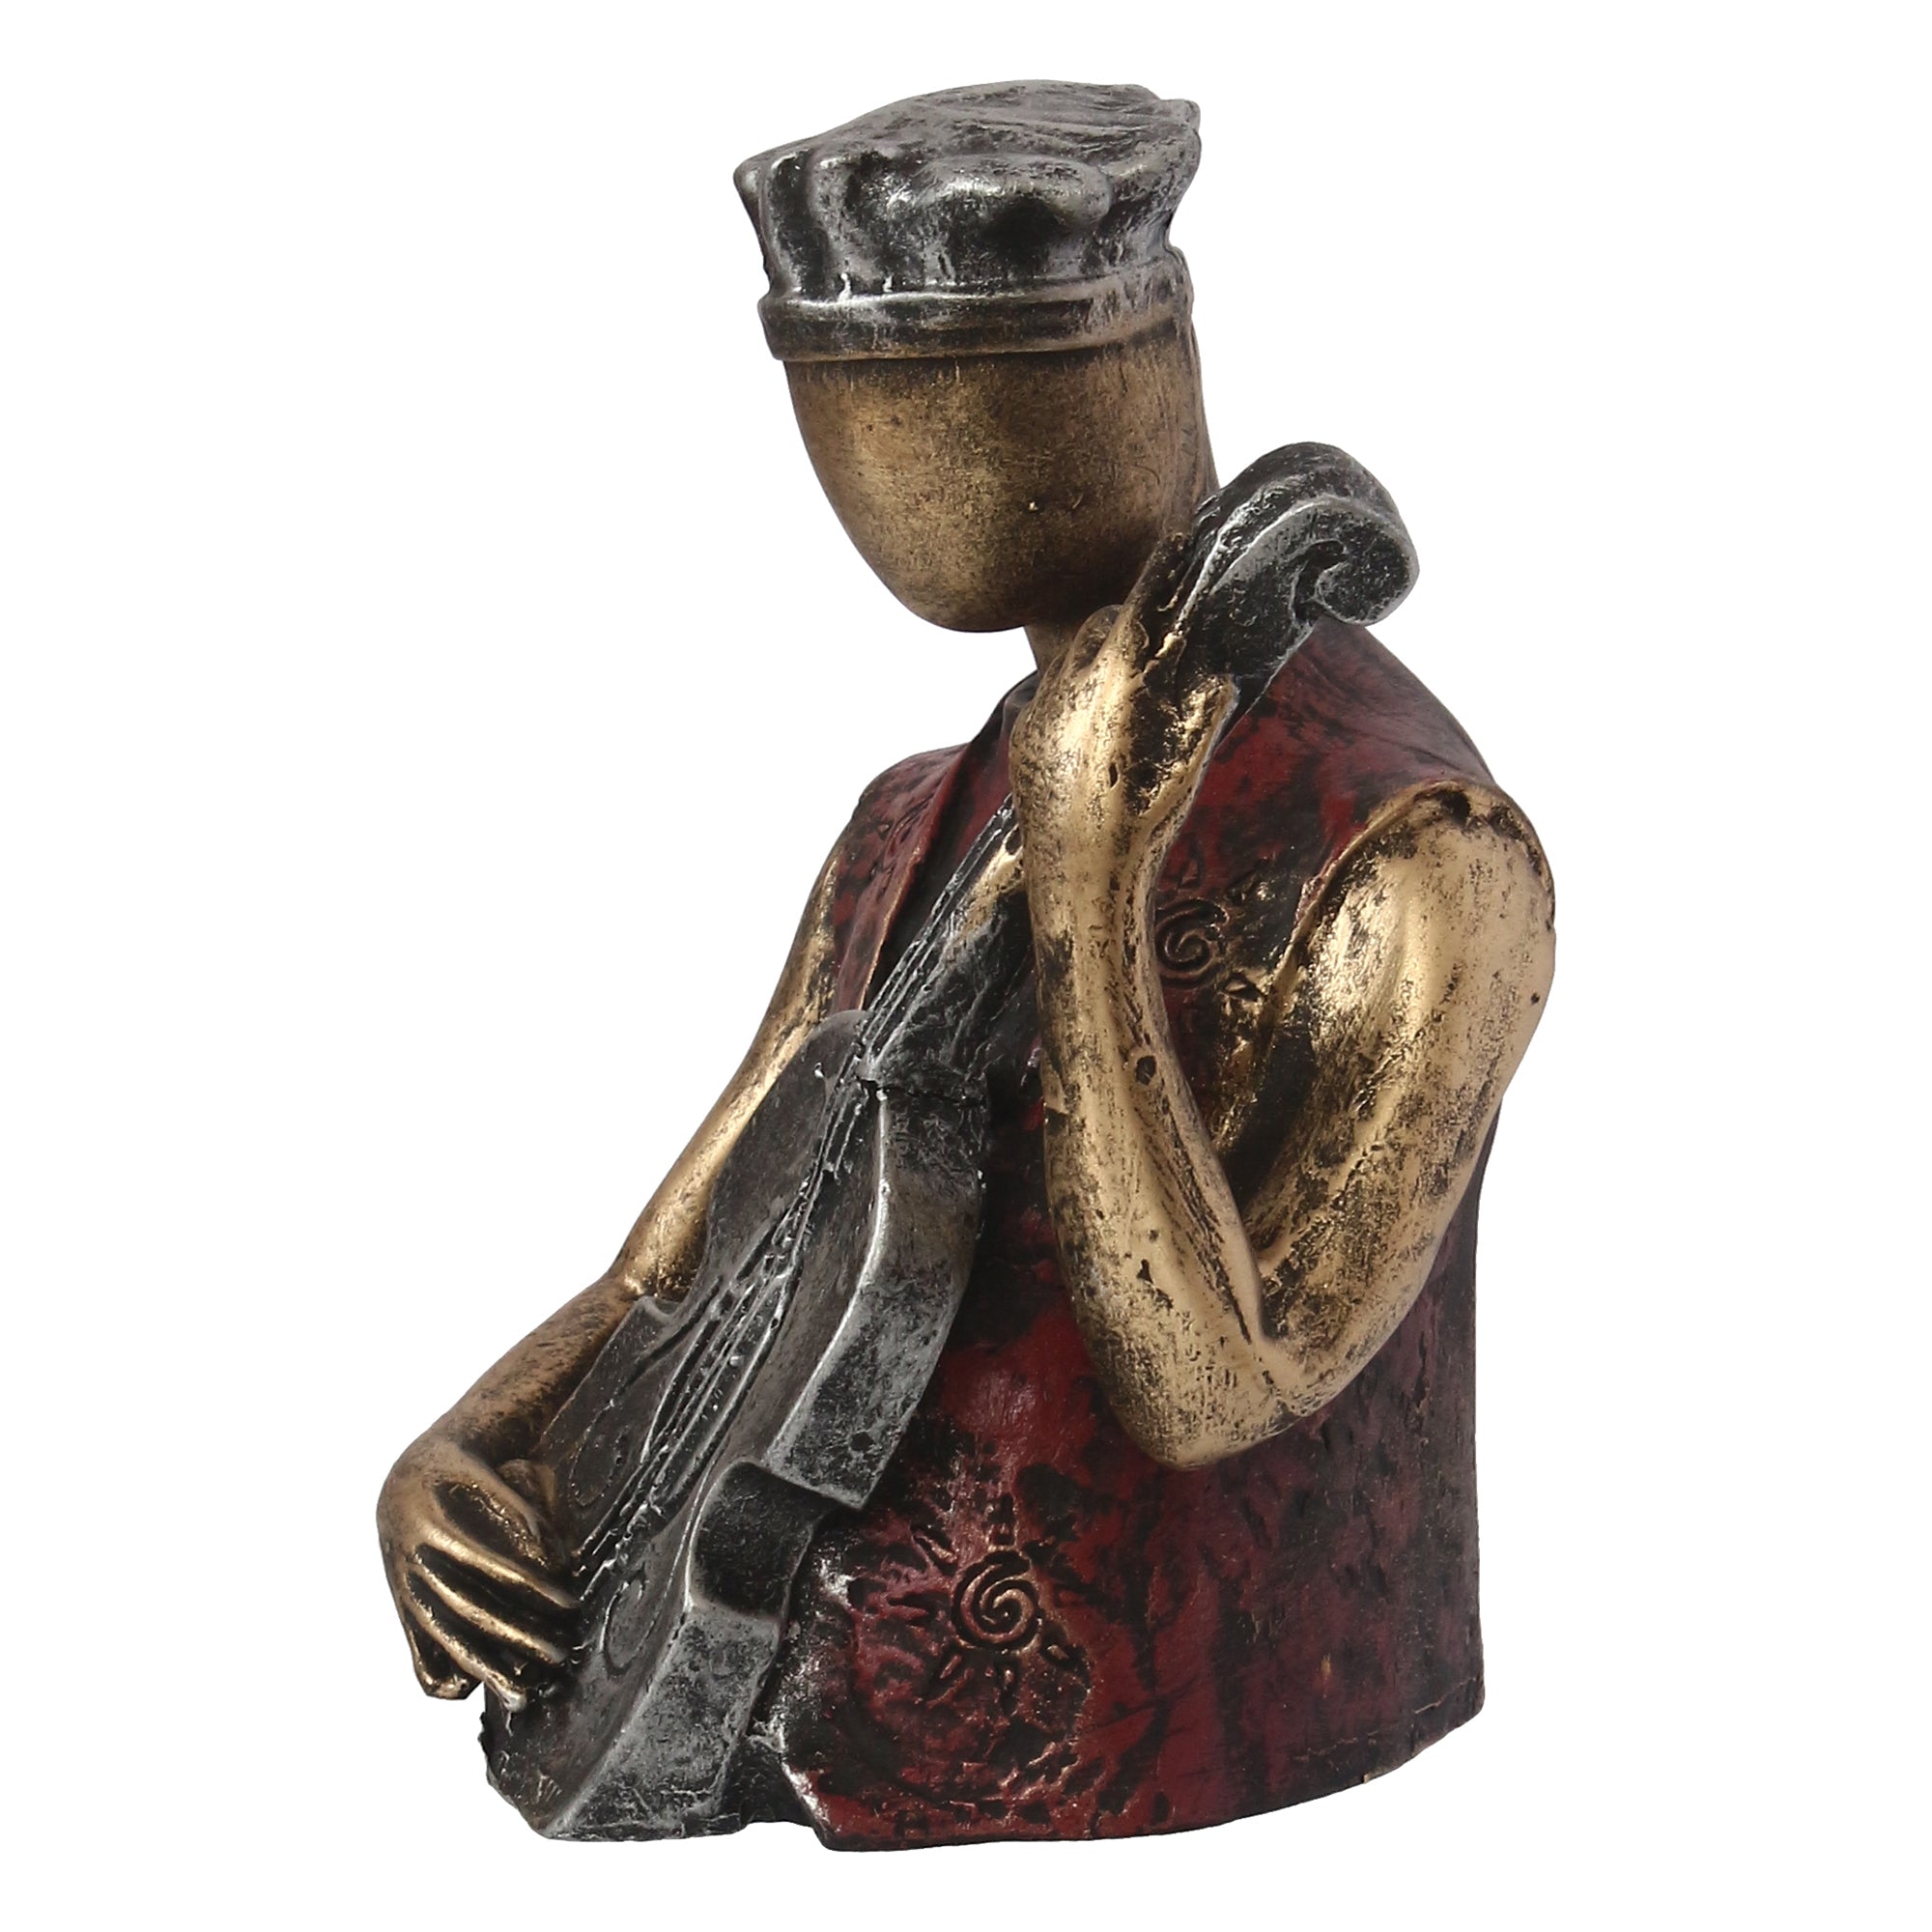 Man Figurine with Hat playing Guitar Musical Instrument (Brown, Silver and Golden) 4